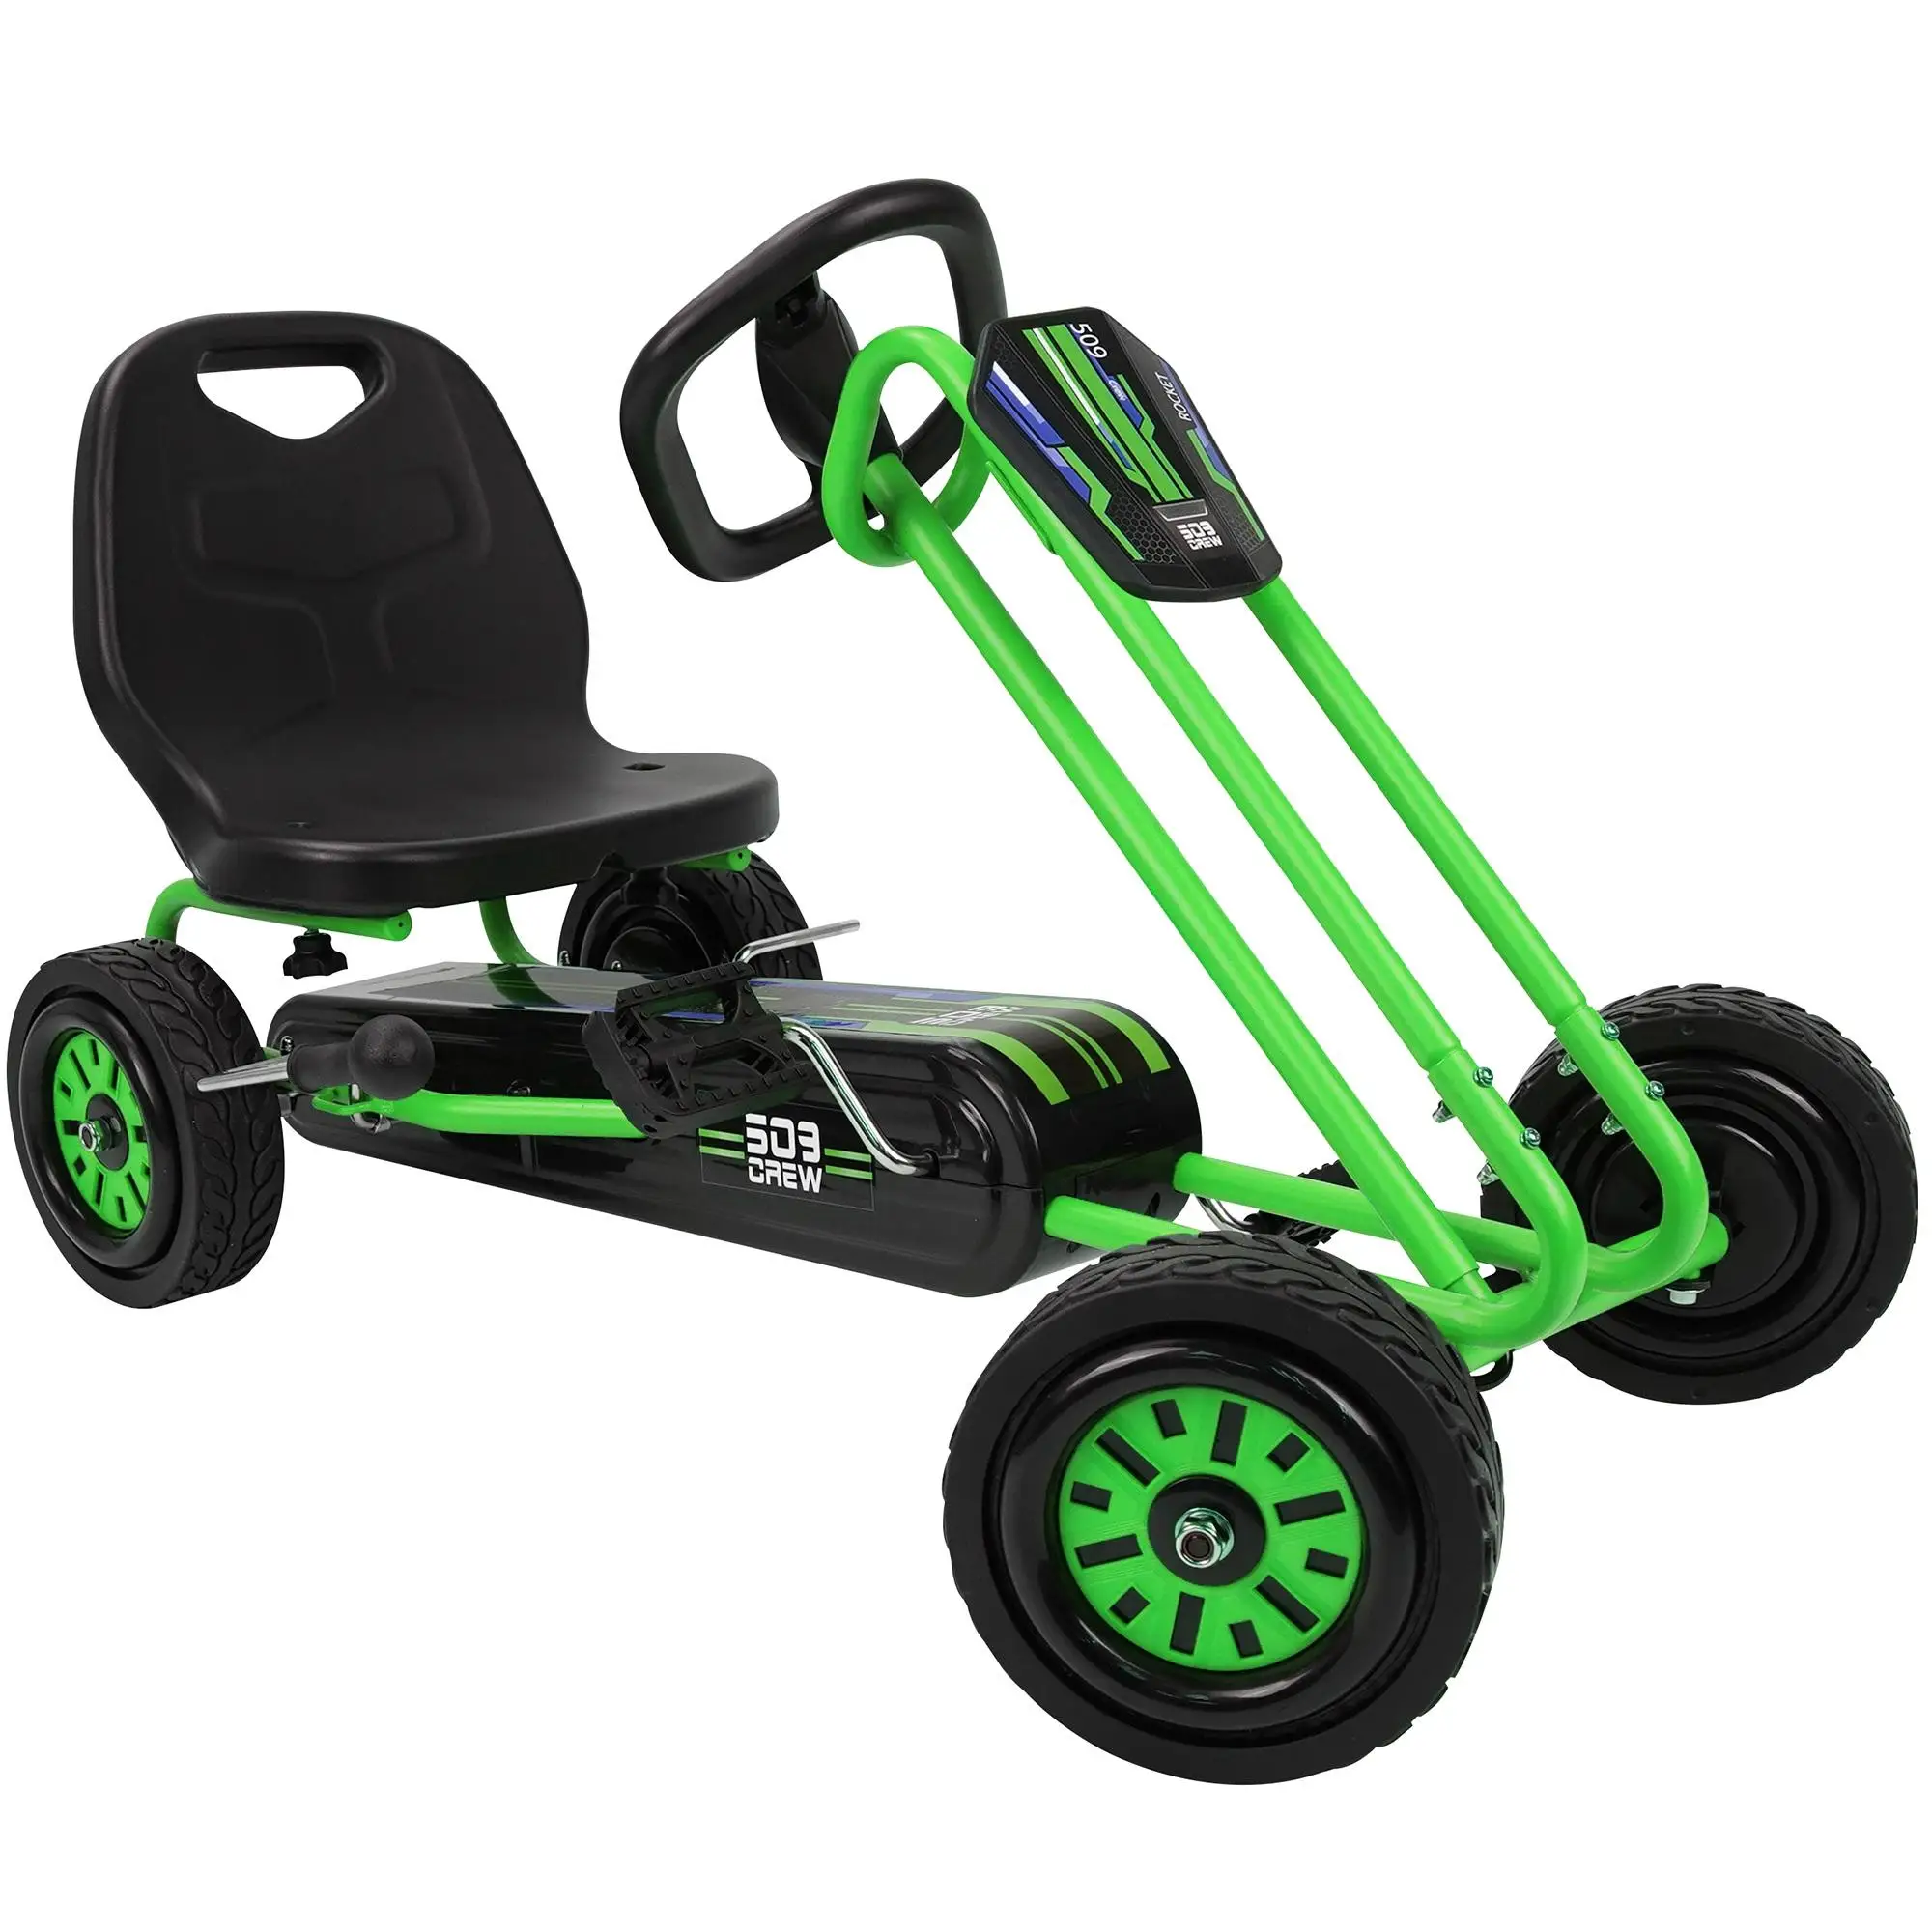 

Rocket Pedal Green Go Kart - Ride on Toy for Boys & Girls With Ergonomic Adjustable Seat & Sharp Handling, Ages 4+